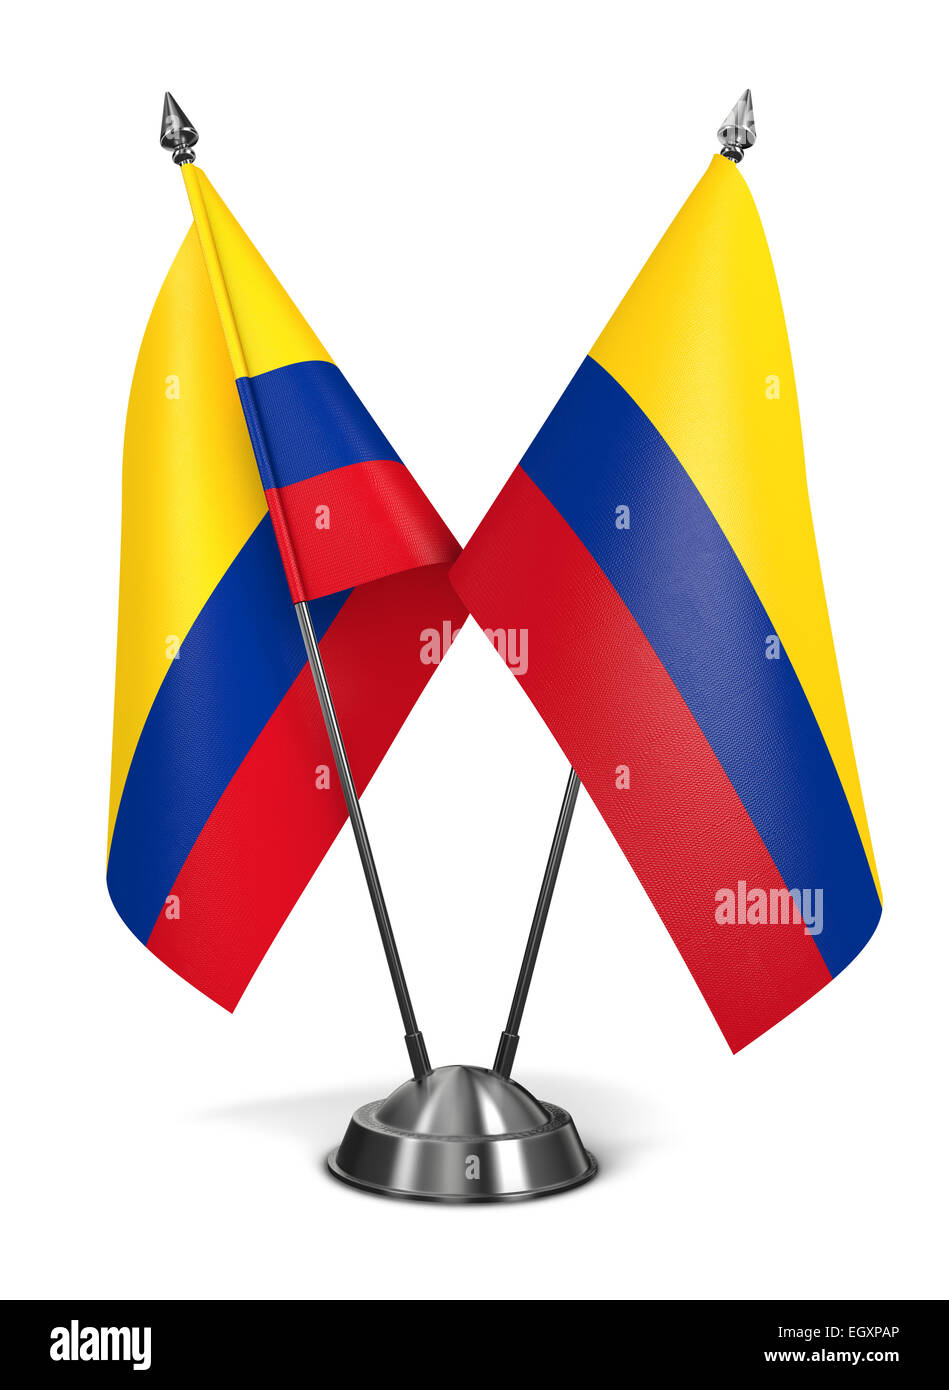 Colombia - Miniature Flags. Stock Photo